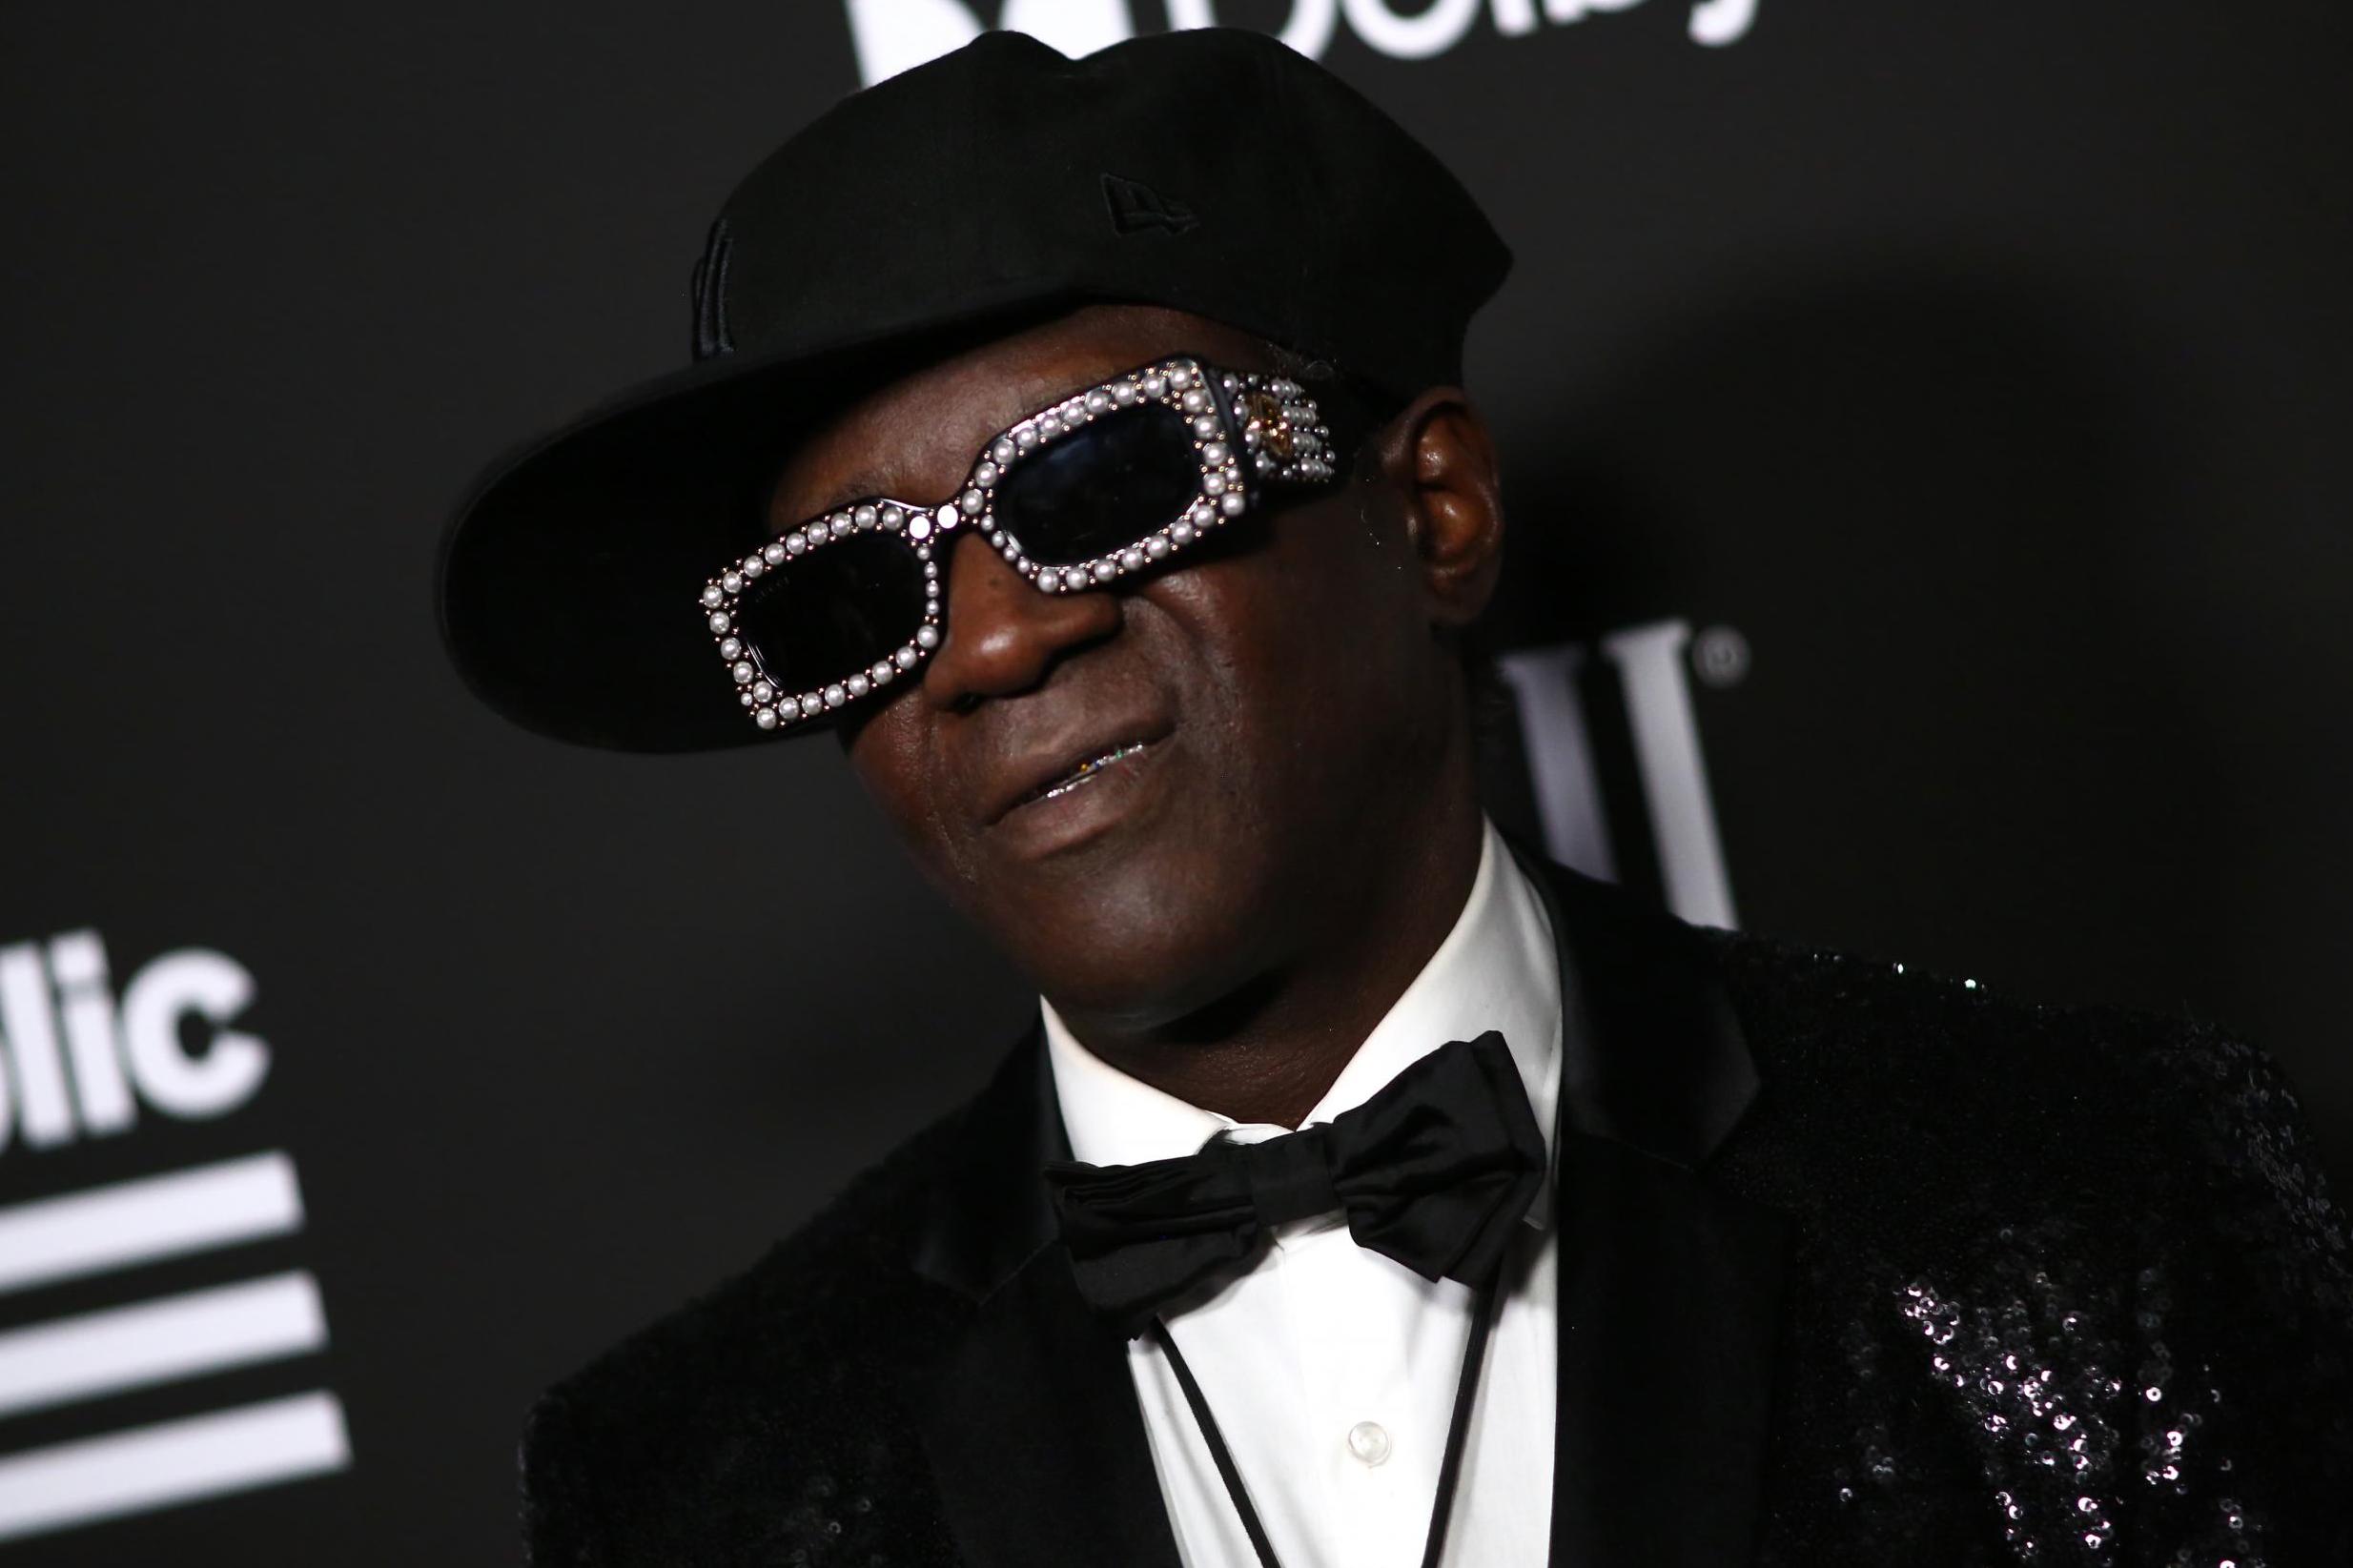 Flavor Flav at a Grammys after-party on 26 January 2020 in West Hollywood, California.